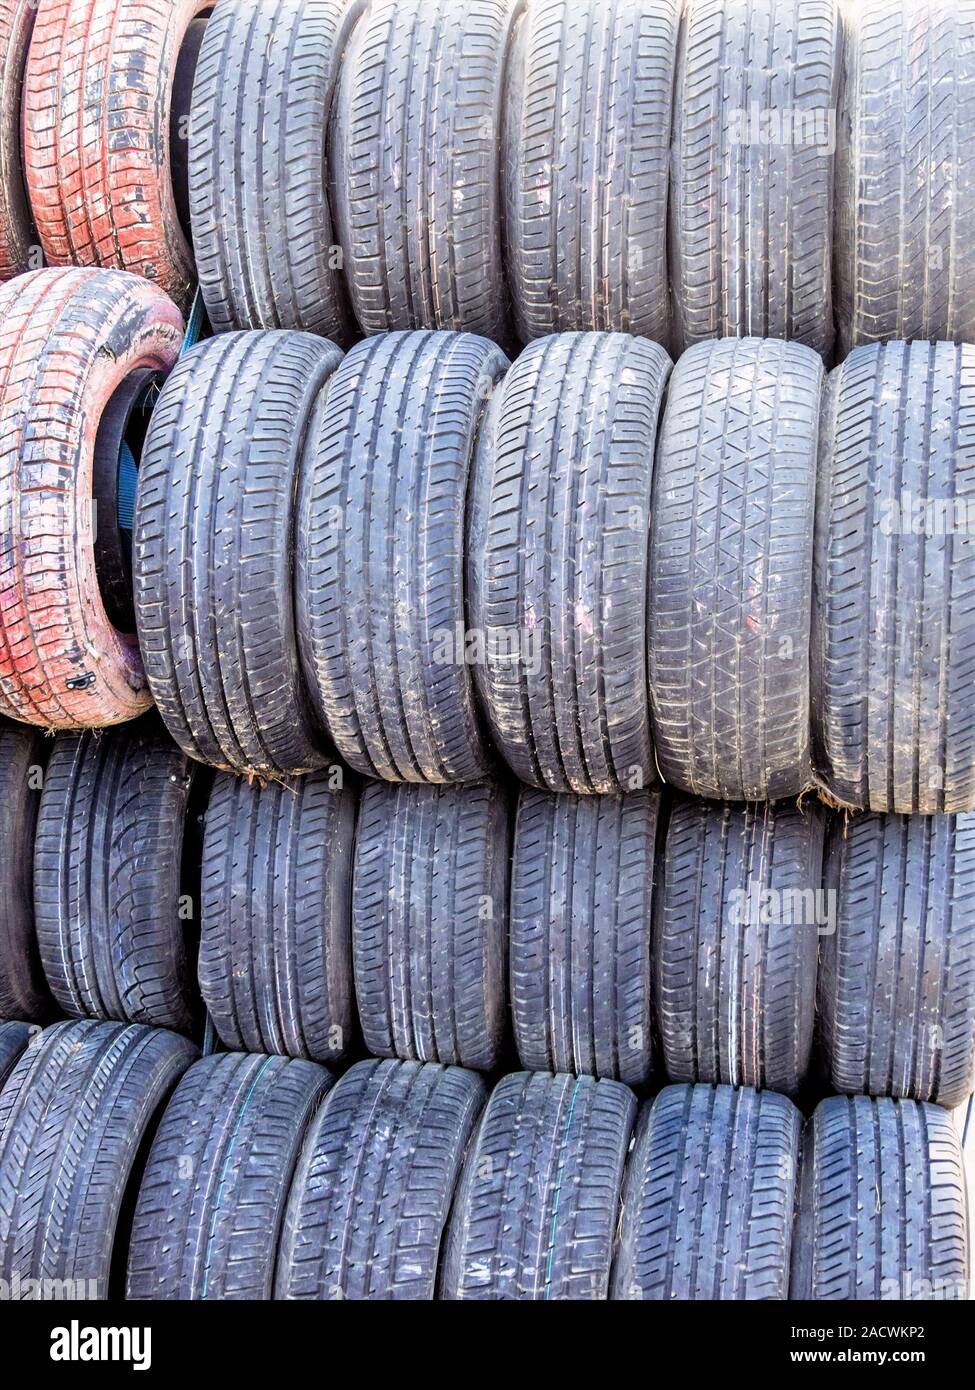 Stack of worn car tires Stock Photo